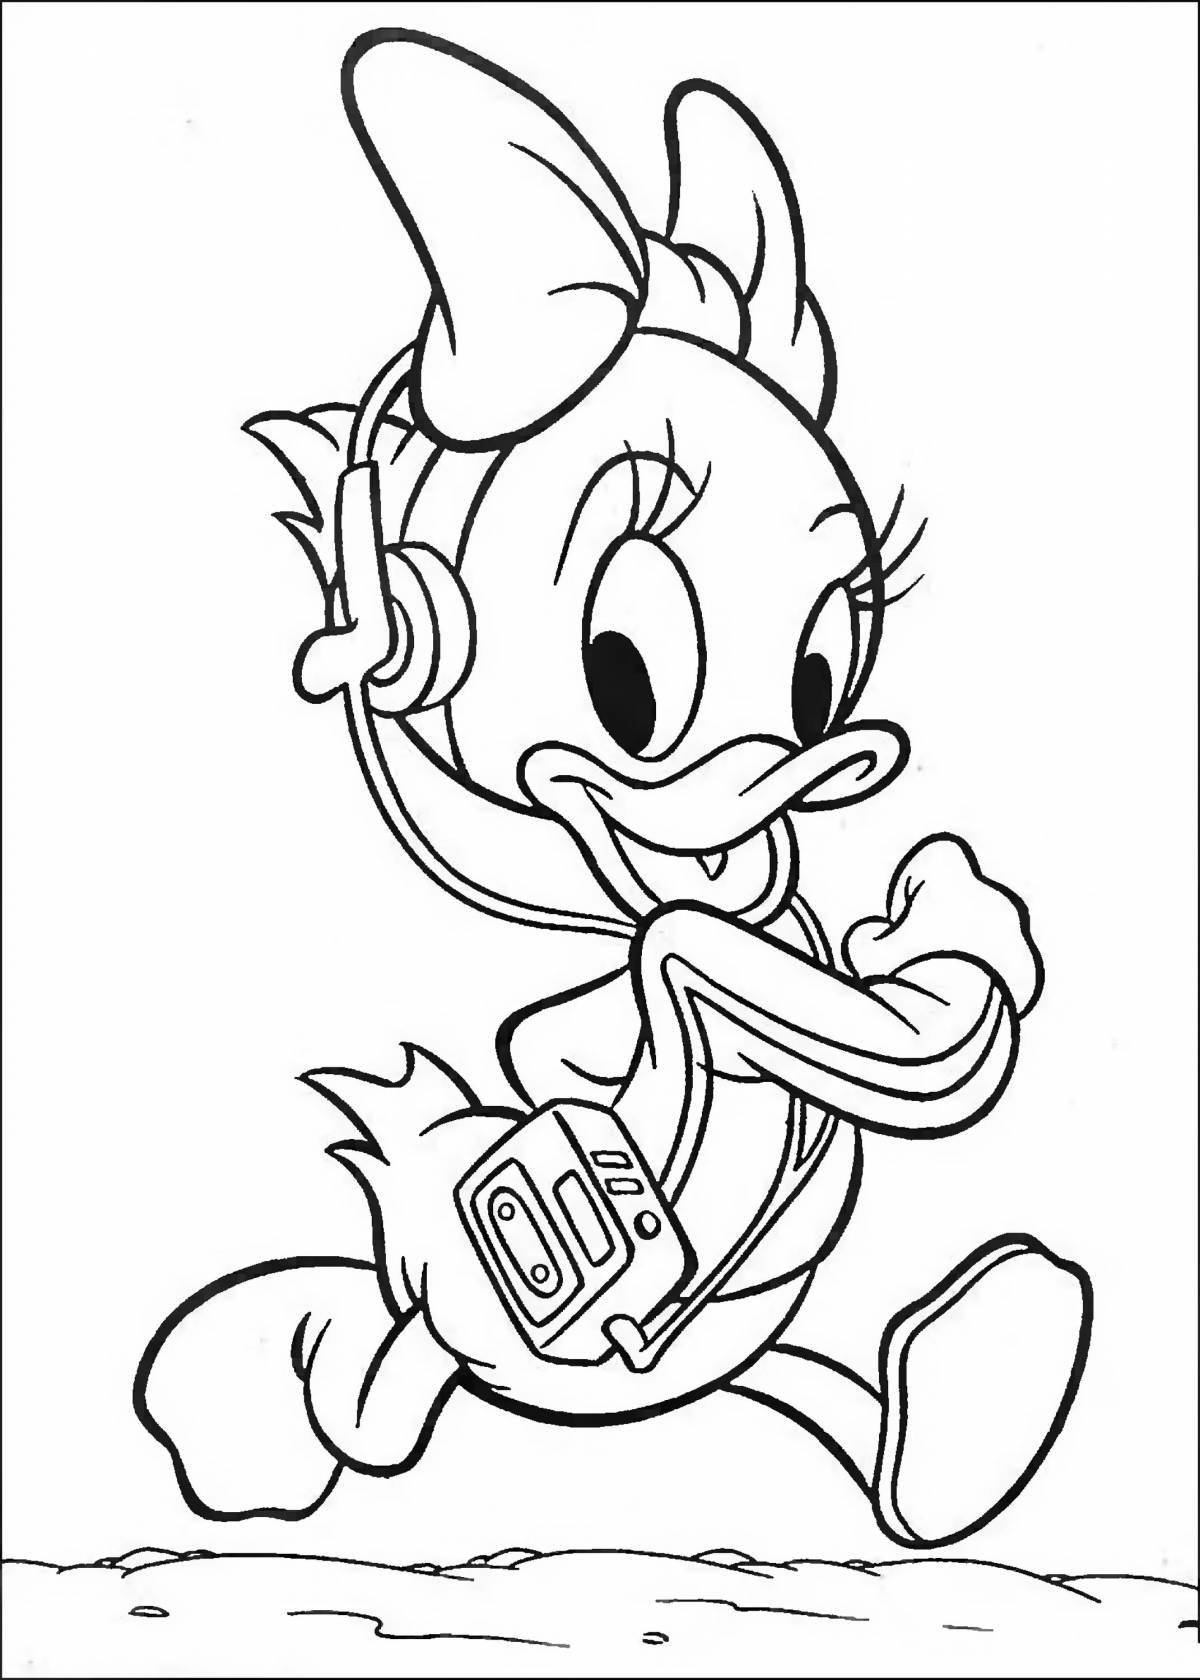 Coloring book colorful cartoon character